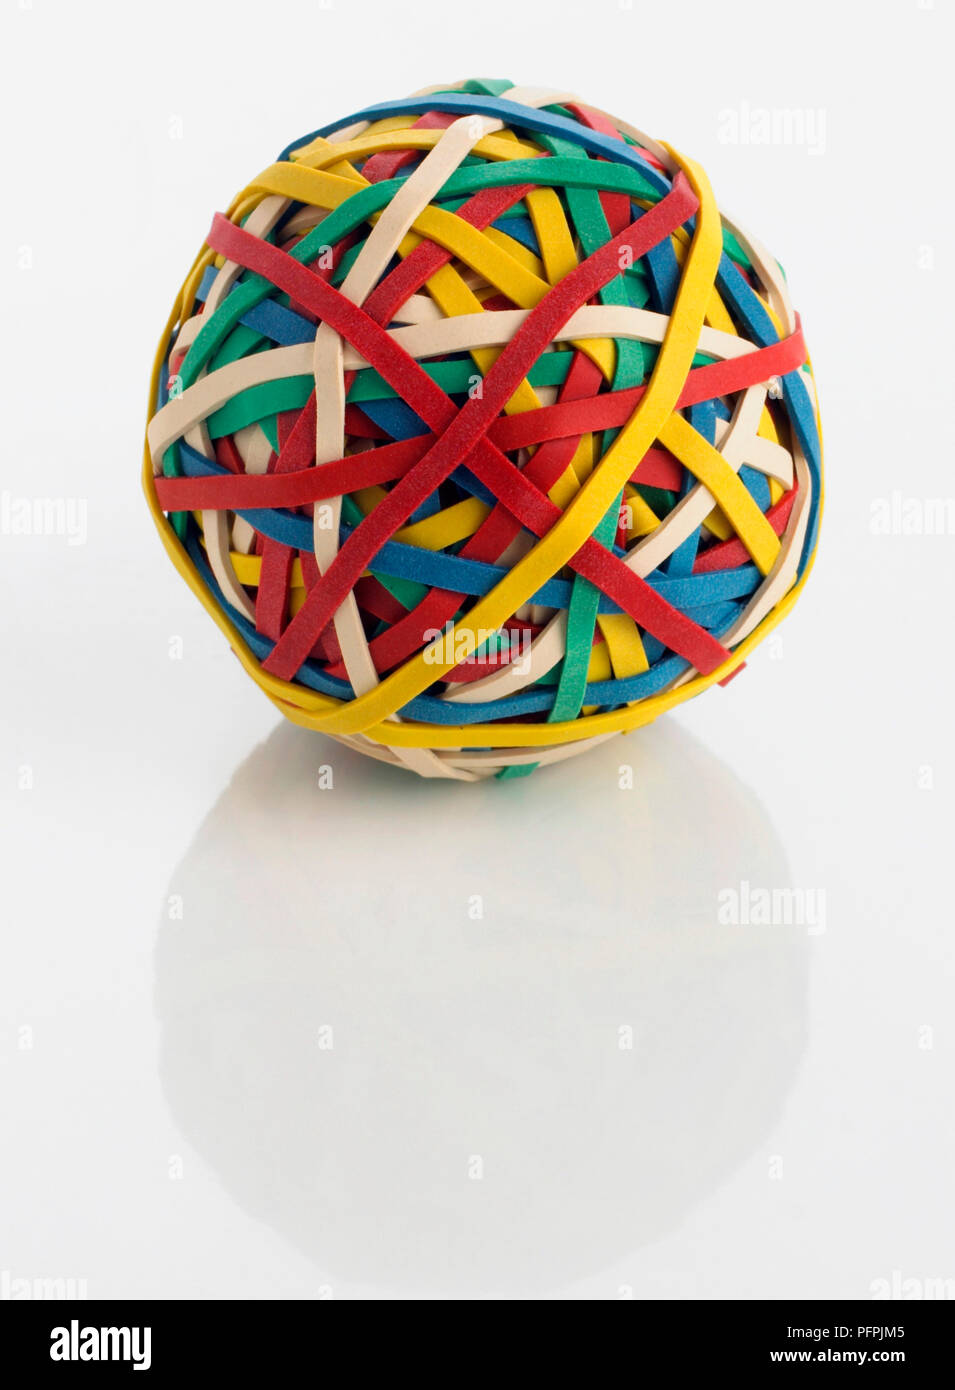 Ball of coloured rubber bands Stock Photo